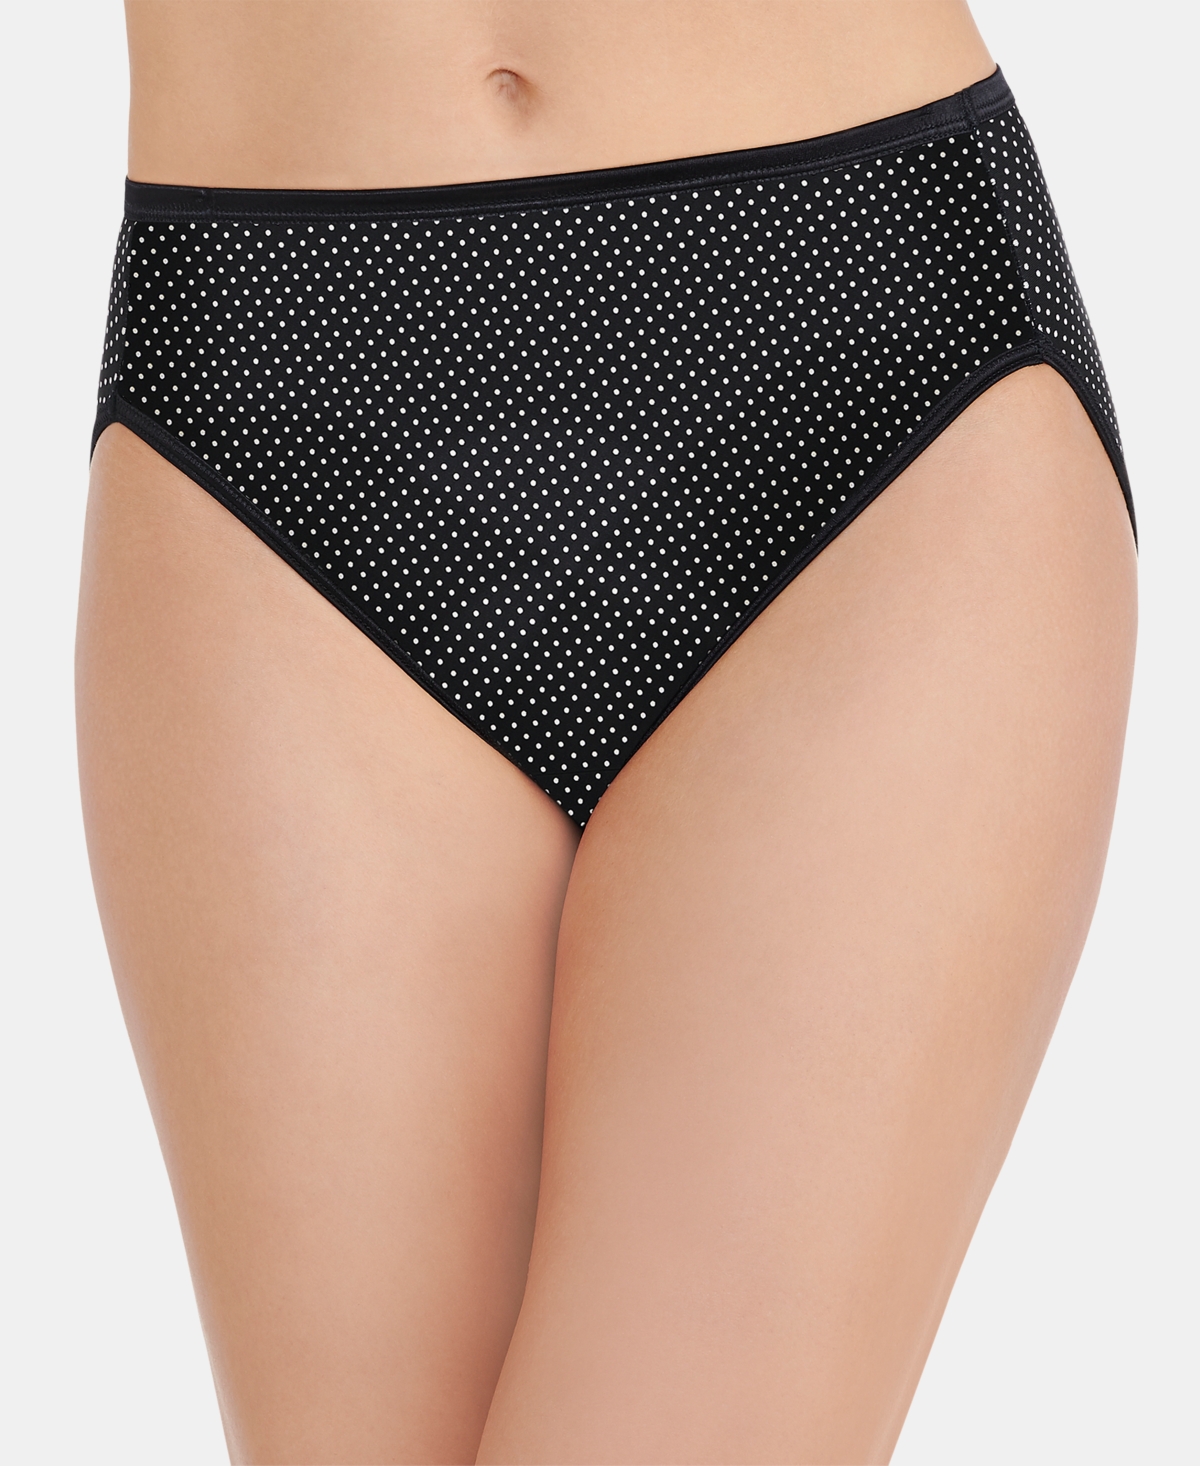 Vanity Fair Illumination Hi-cut Brief Underwear 13108, Also Available In Extended Sizes In Black,white Polkadot